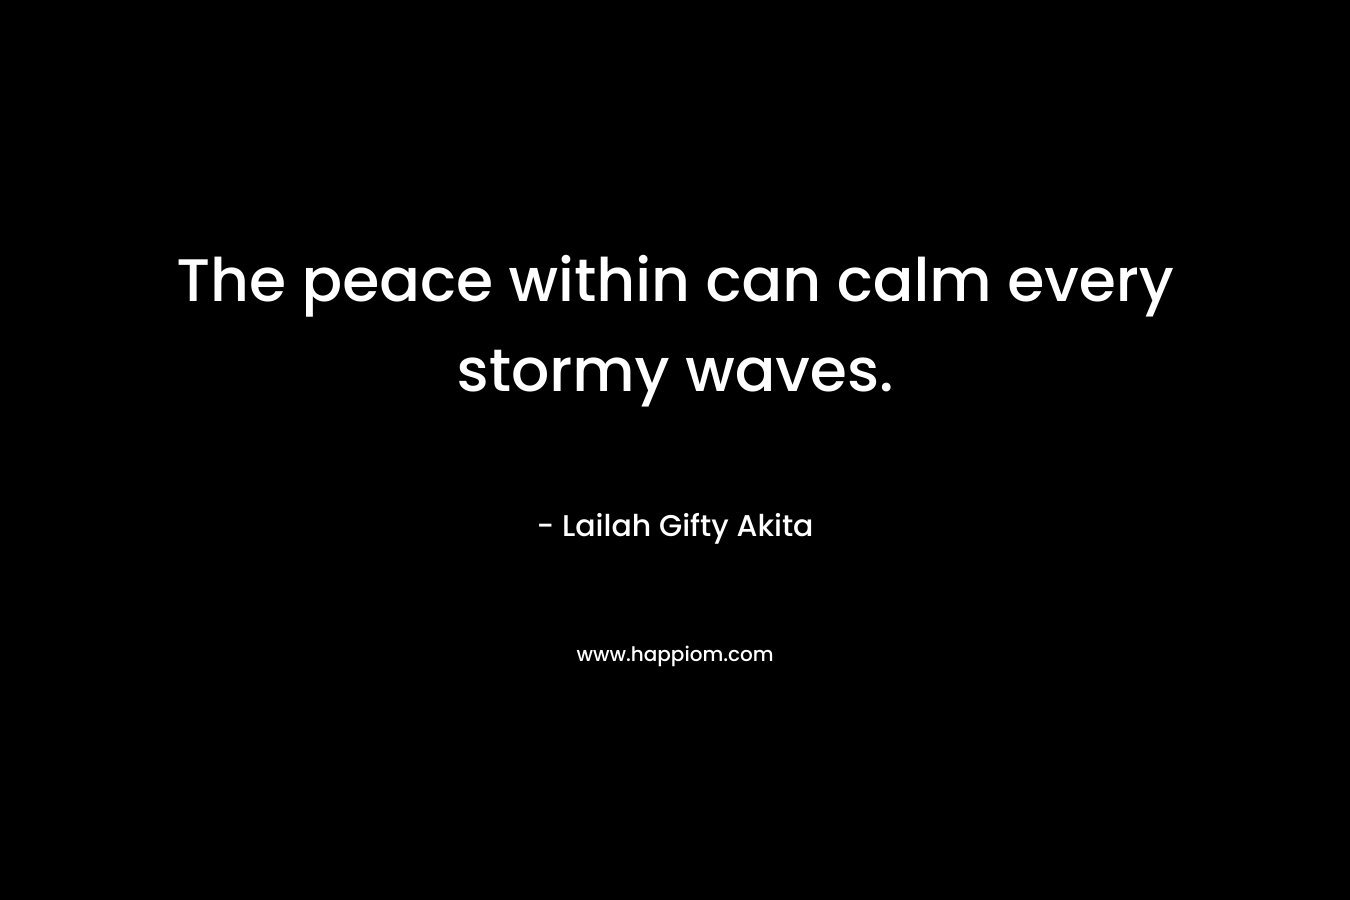 The peace within can calm every stormy waves.